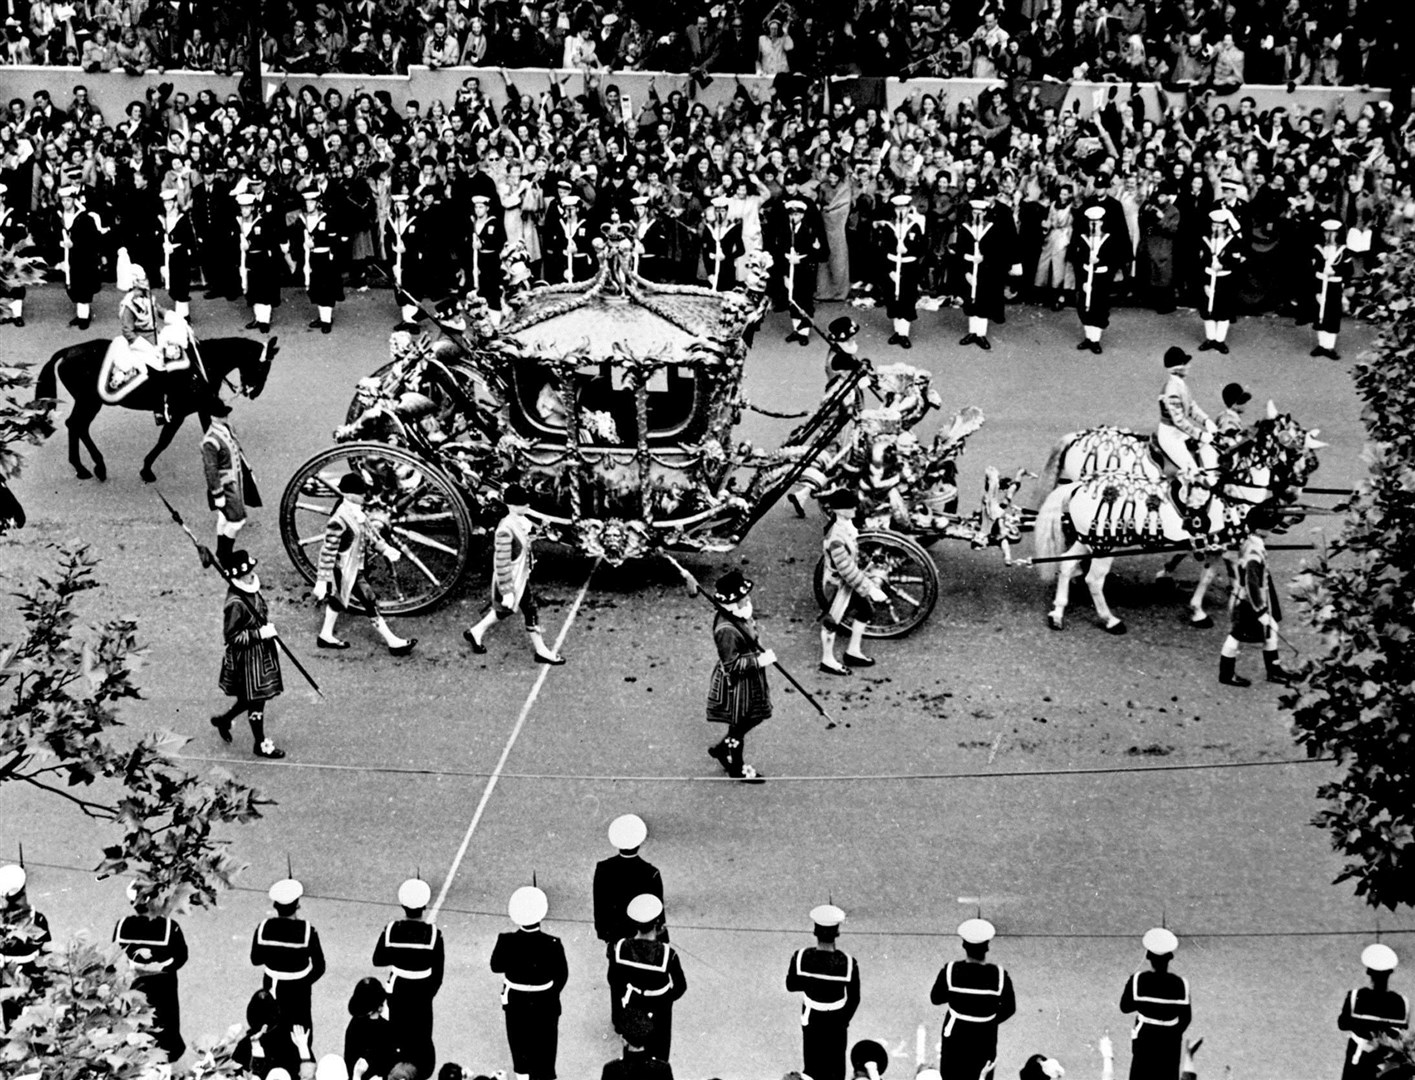 The coach carrying The Queen and Duke of Edinburgh on her coronation day in 1953 (PA)